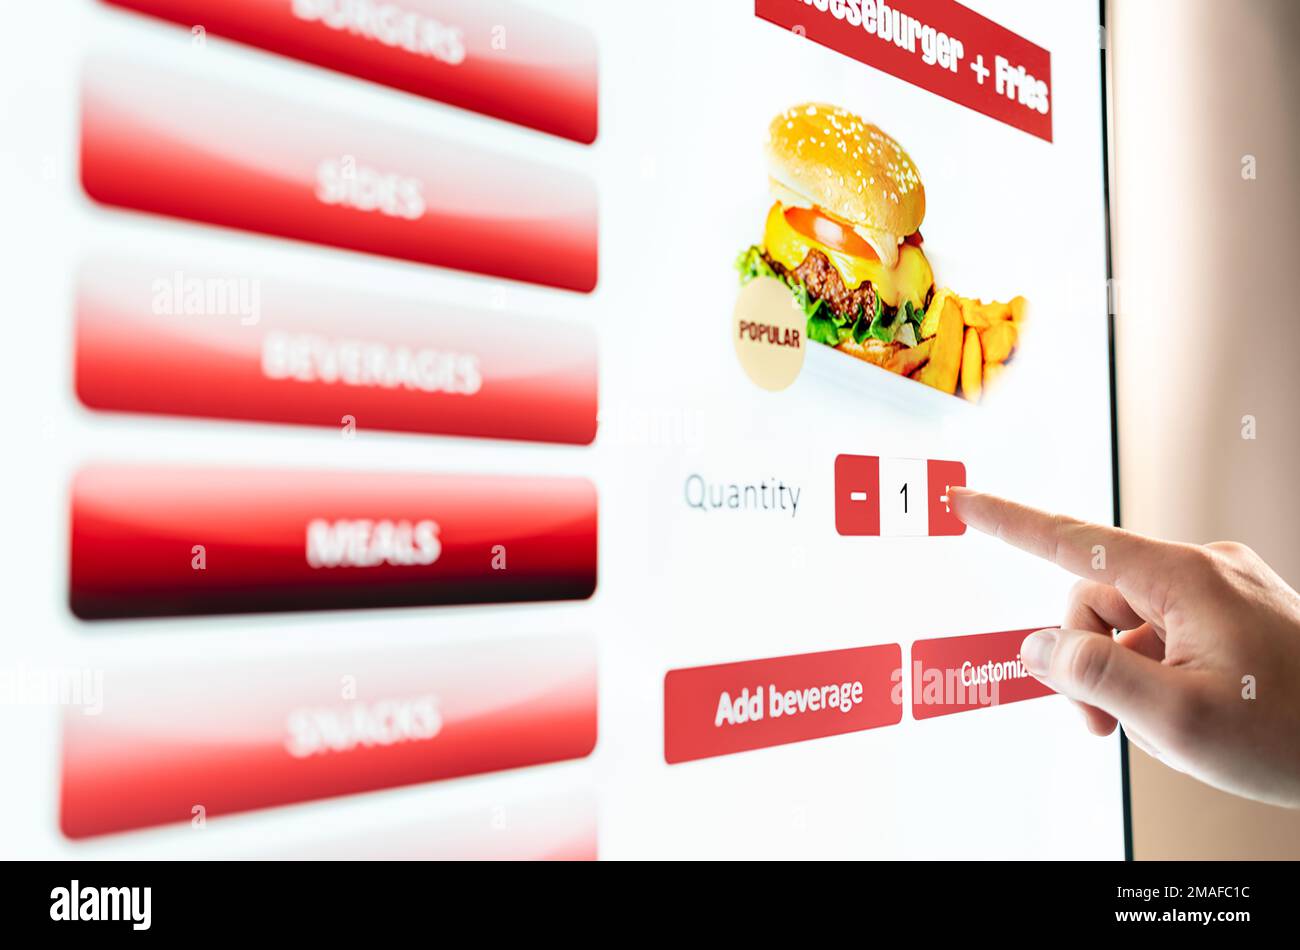 Self service order kiosk and digital menu in fast food burger restaurant. Touch screen in vending machine. Man using electronic selfservice technology. Stock Photo